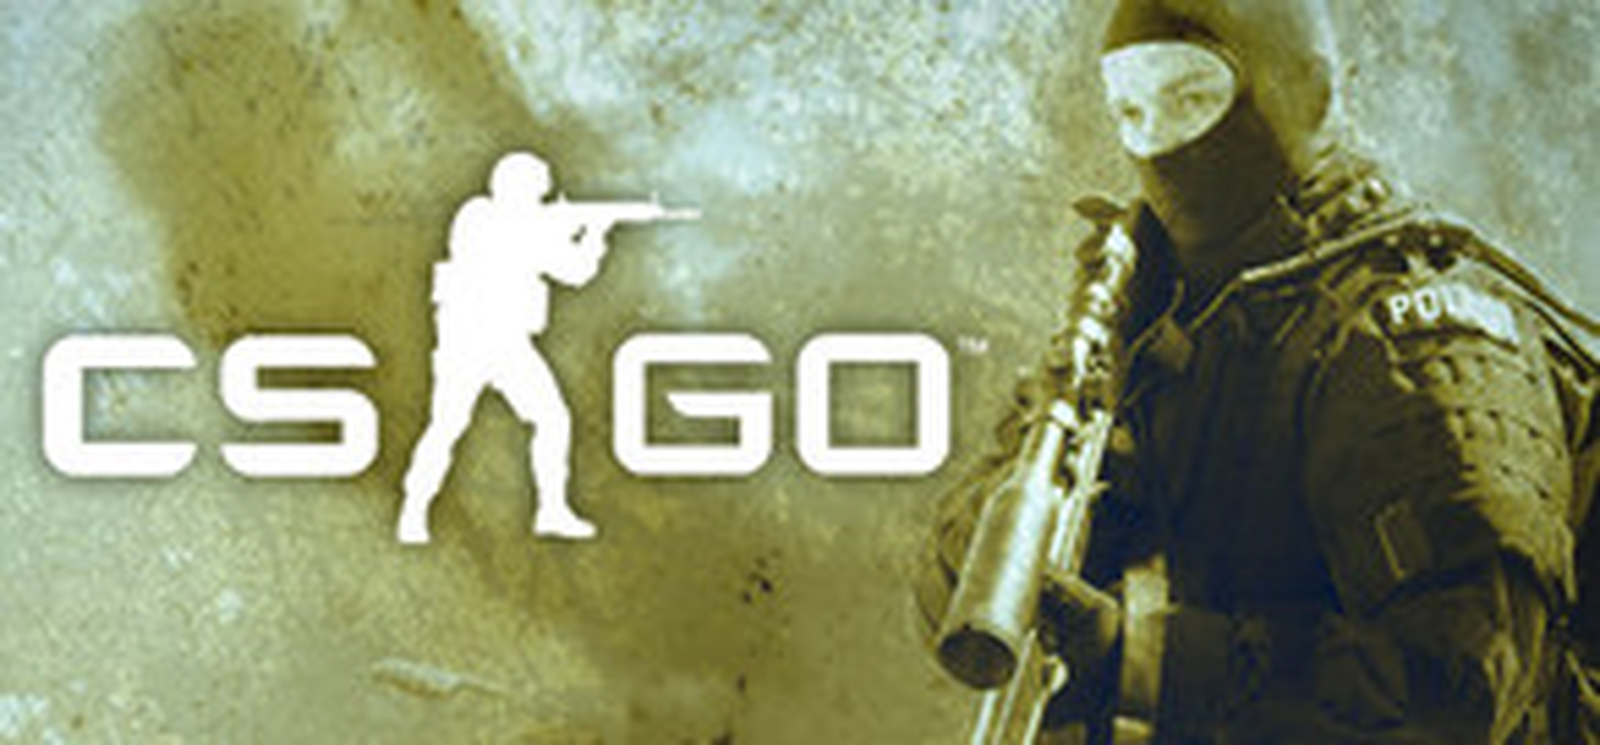 download counter strike mac for free